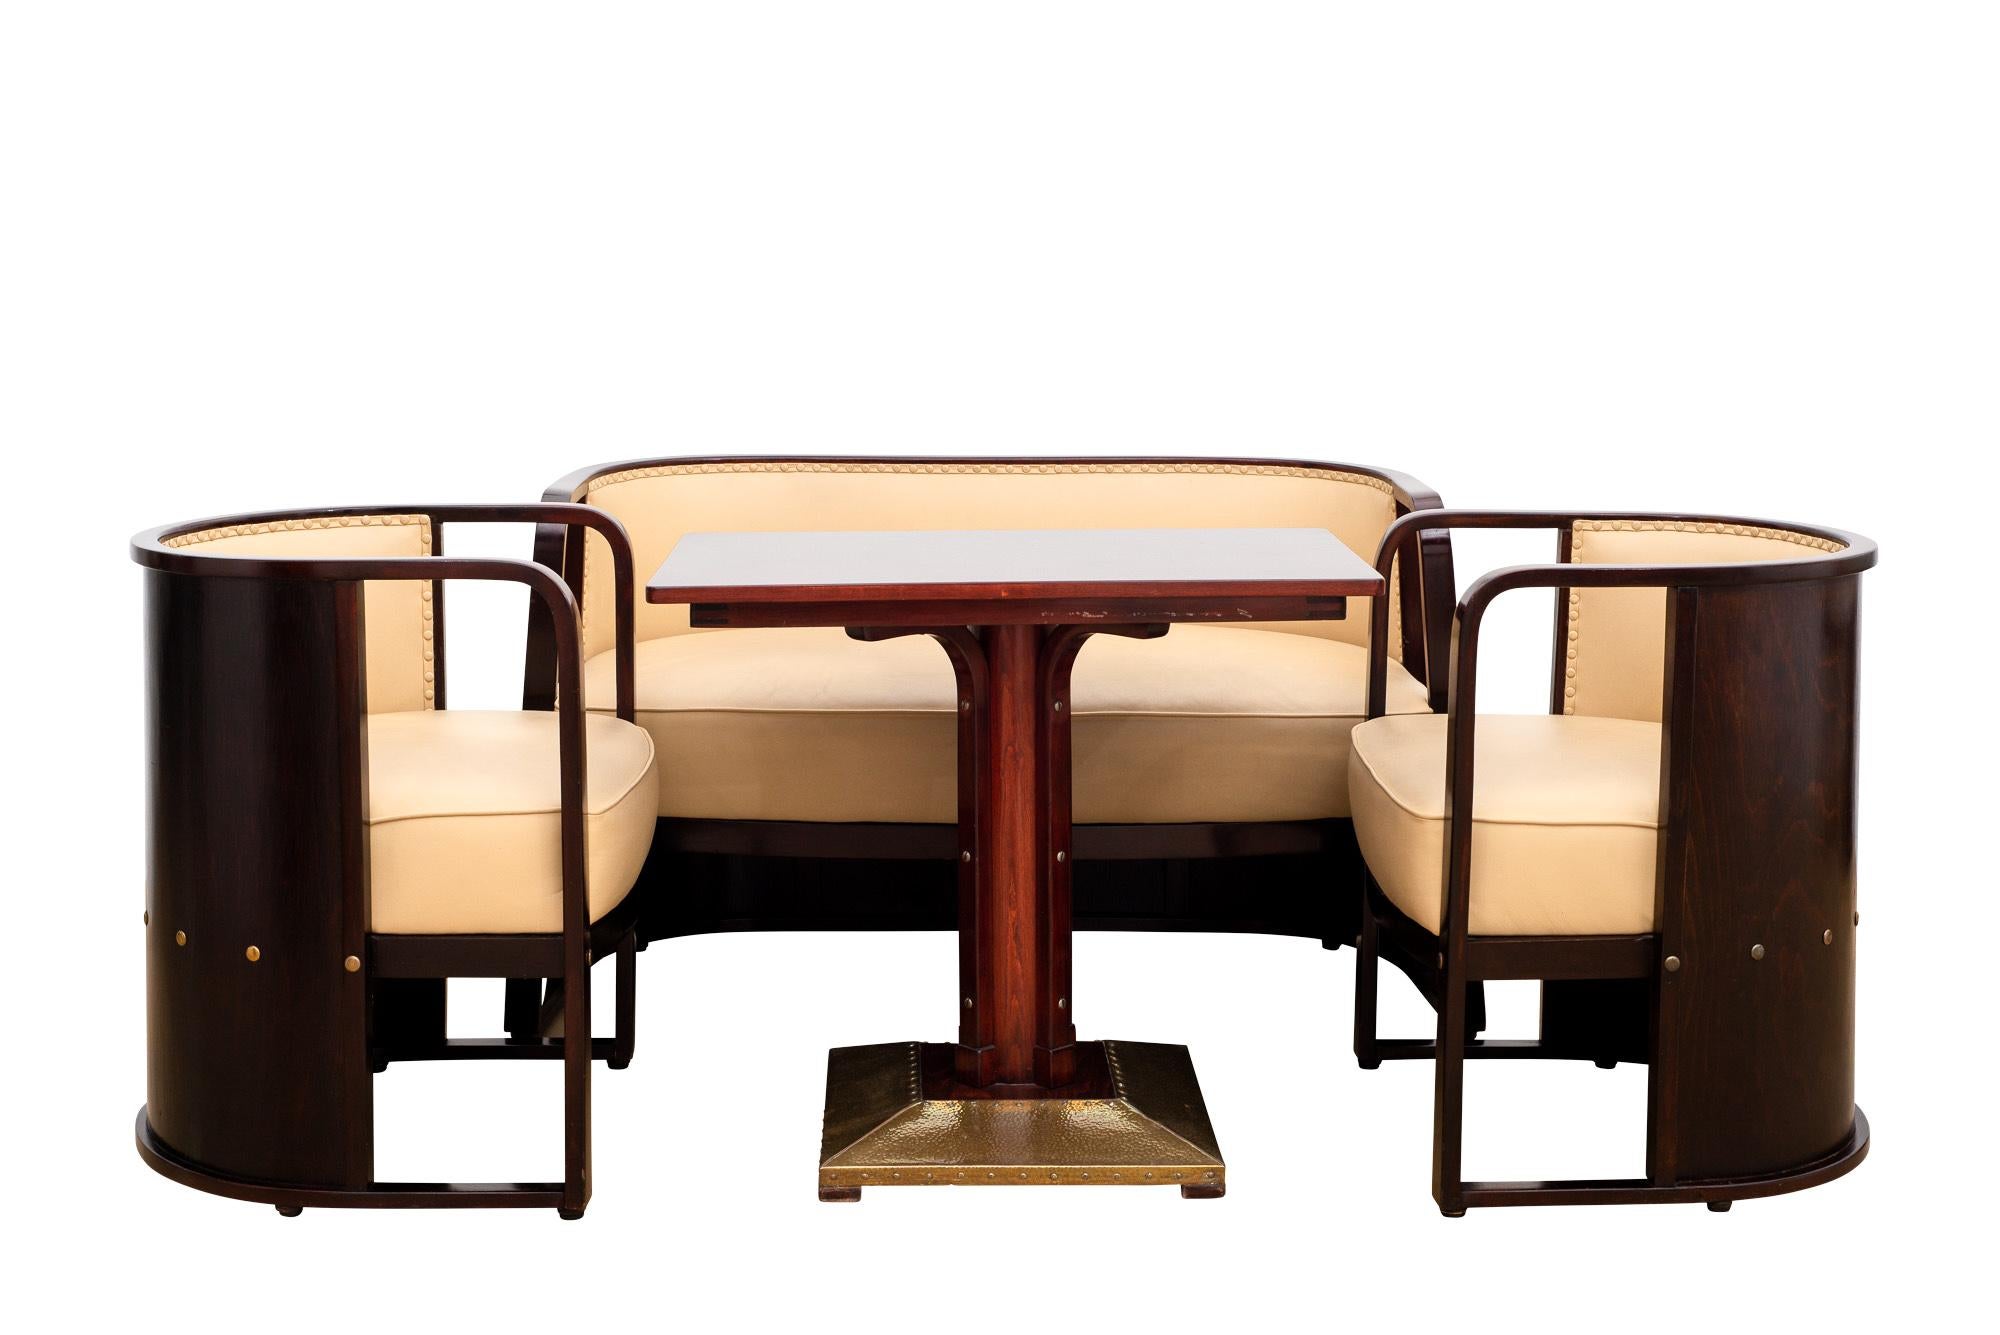 Josef Hoffmann designed this sitting room suite in 1906. In the same year the company Jacob & Josef Kohn started its production with the model number 421. The furniture suit appeared for the first time in a Kohn catalogue in January 1907.
This